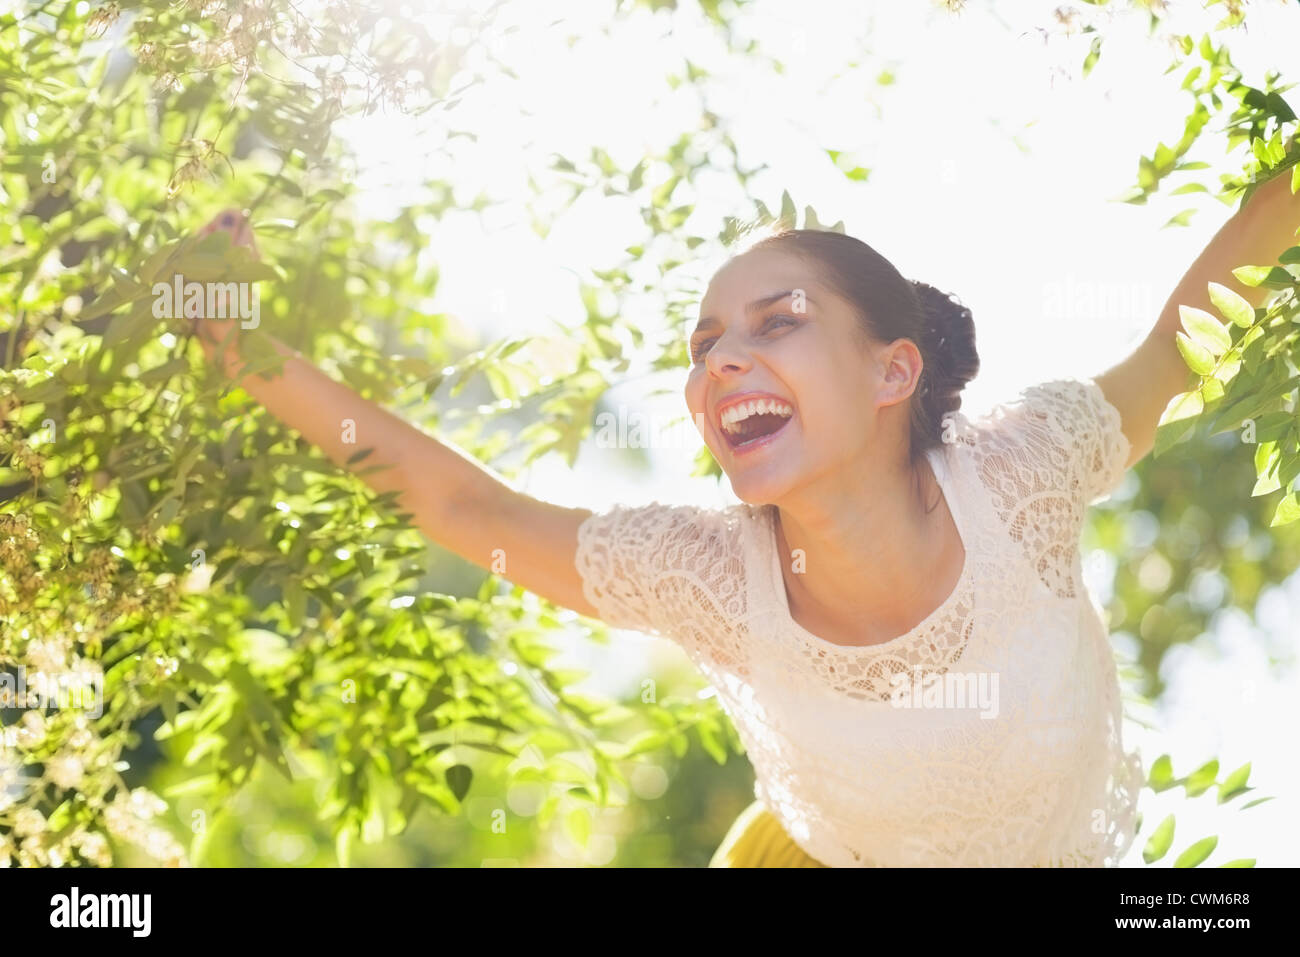 Cheerful young woman playing in foliage in forest Stock Photo